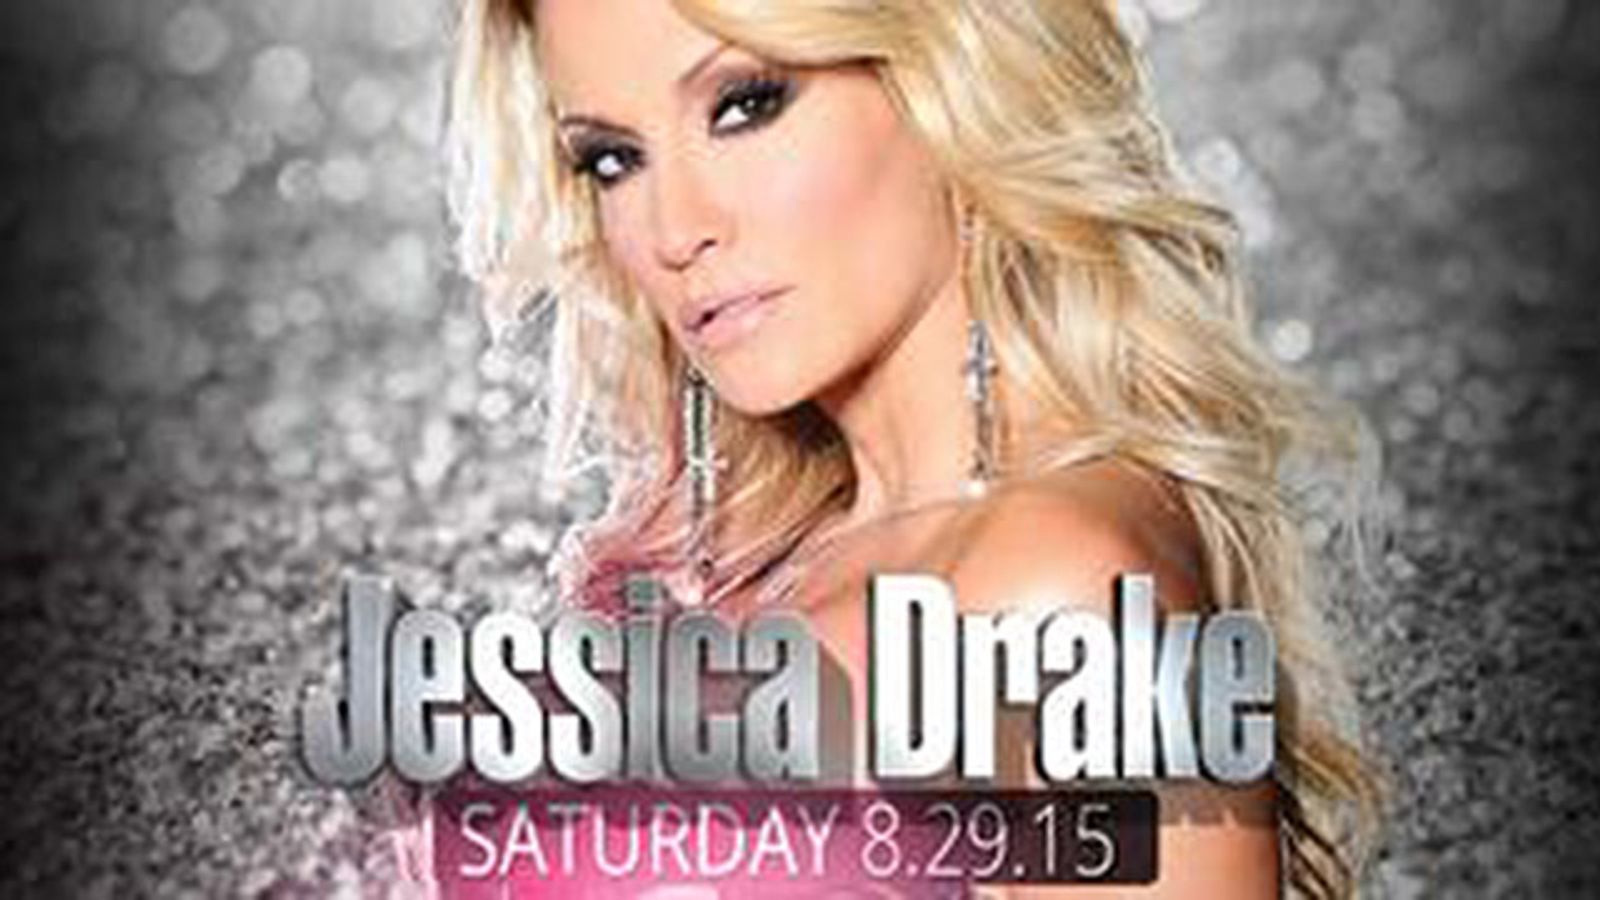 jessica drake to Feature for 1 Night Only at Sapphire New York